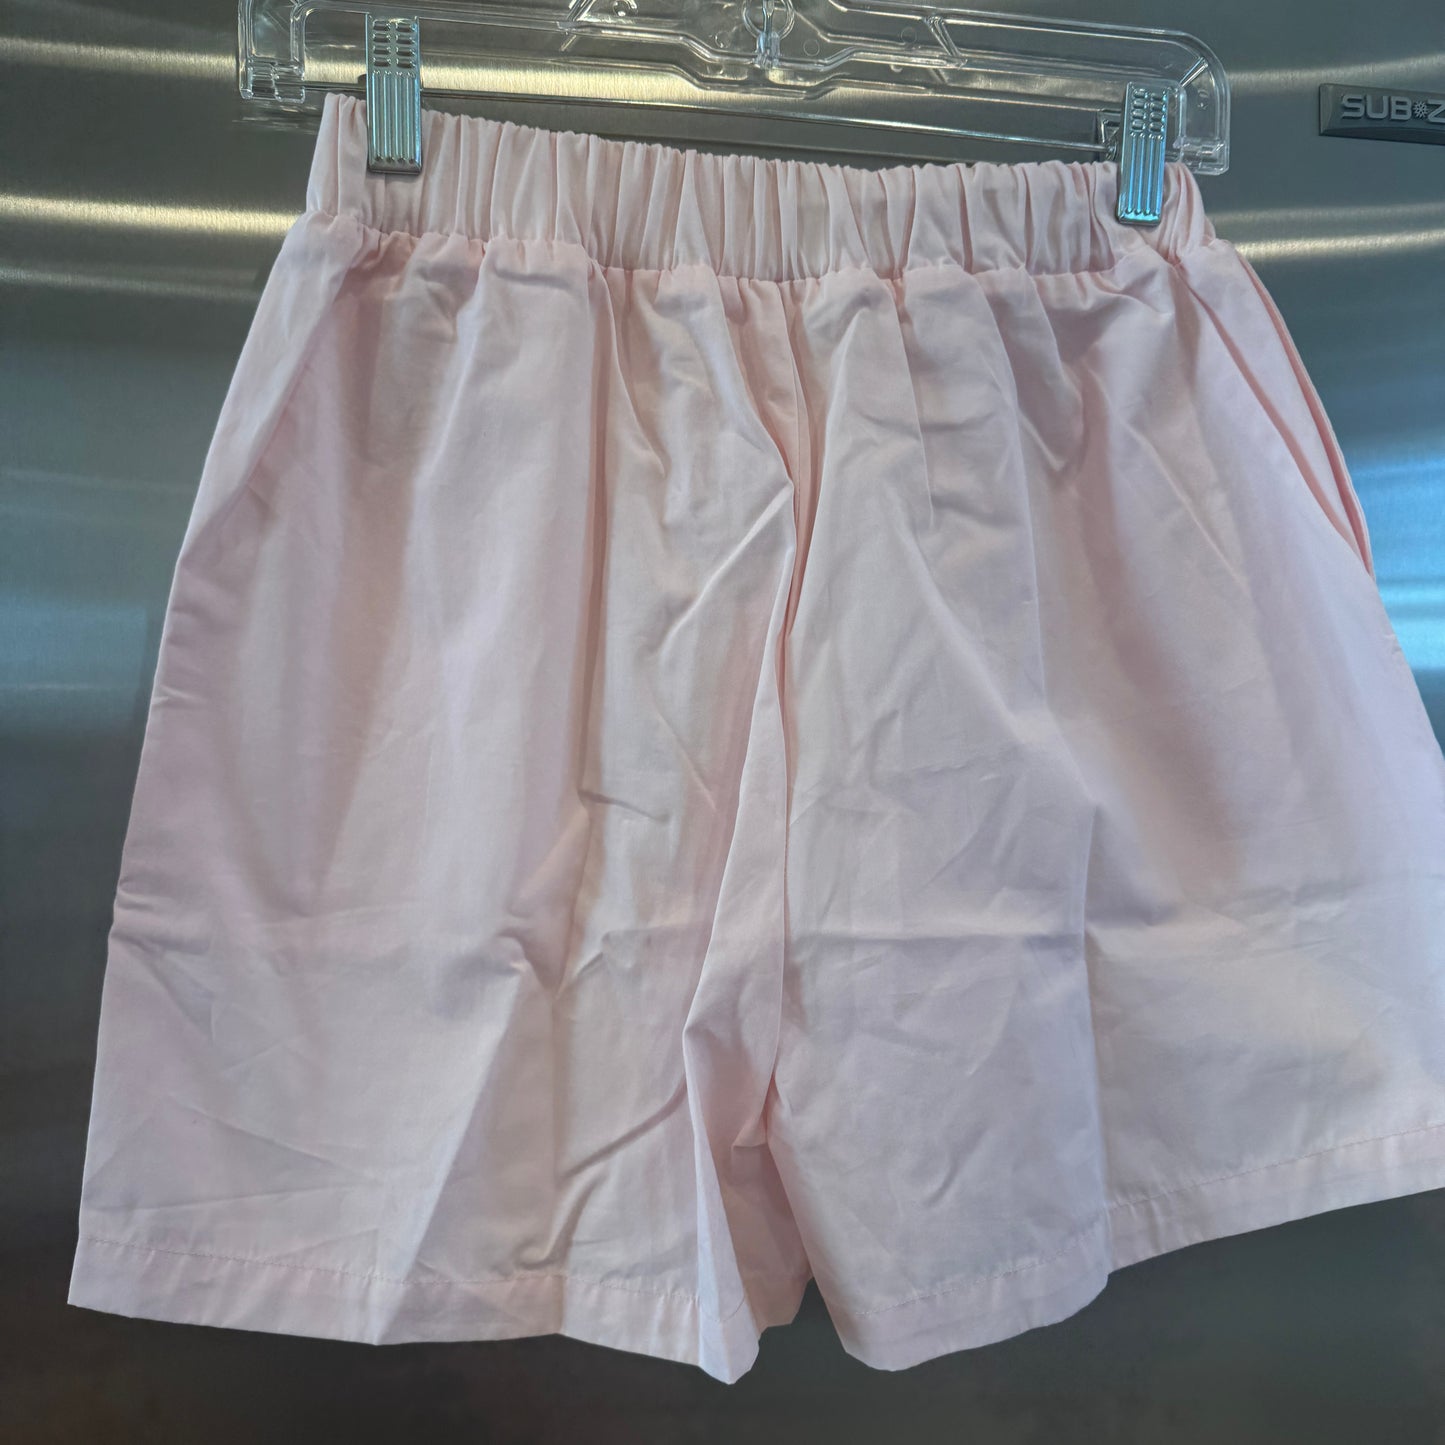 Anine Bing Liam Boxer Short Women’s Shorts with pockets in blush light pink